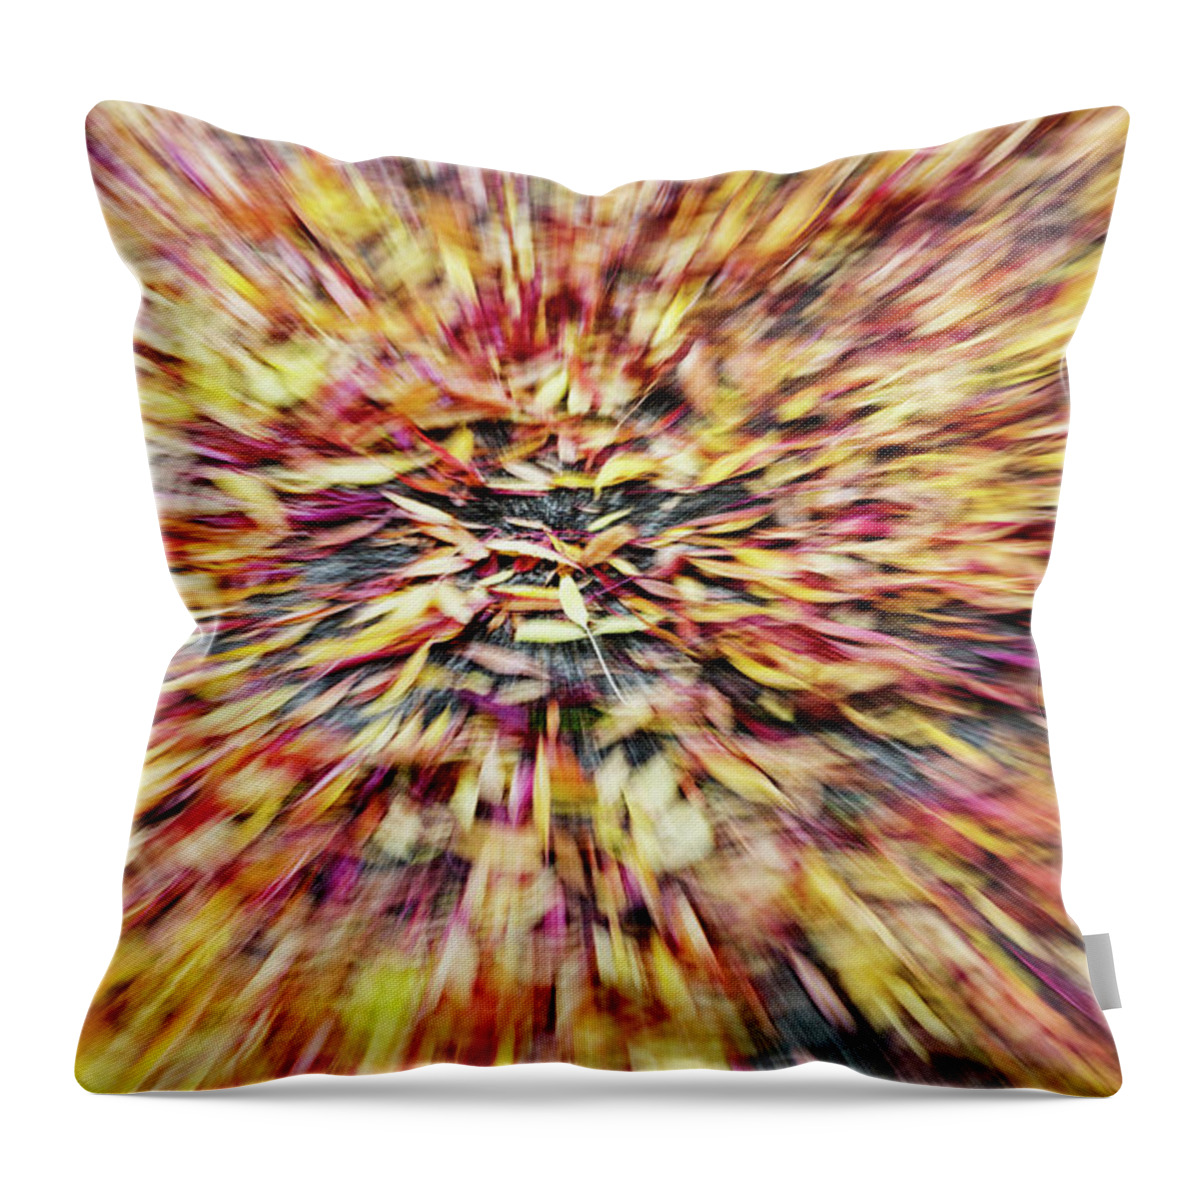 Leaves Throw Pillow featuring the photograph Abstract Leaves 1 by Rebecca Cozart